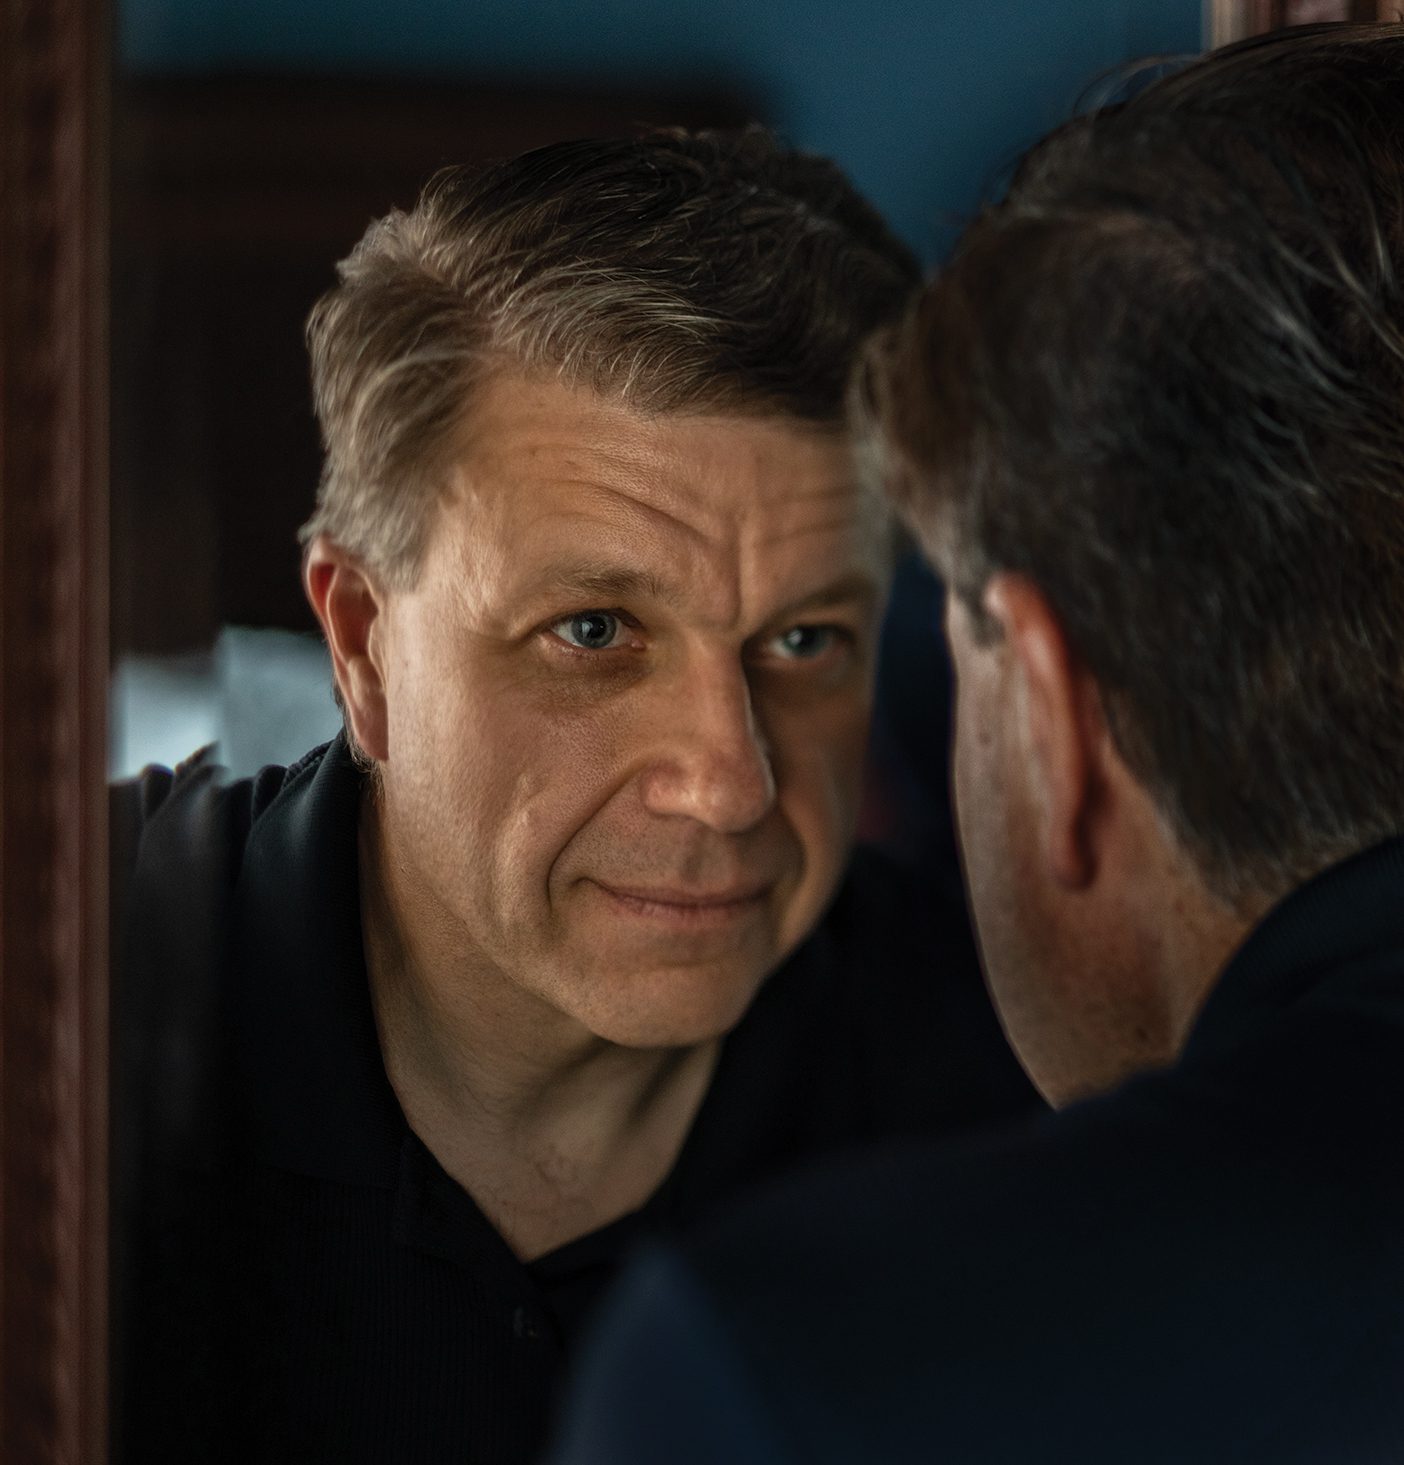 A handsome middle-aged man practices self-compassion by looking at his reflection in a mirror and imagining he is a person who cares deeply about himself and others.